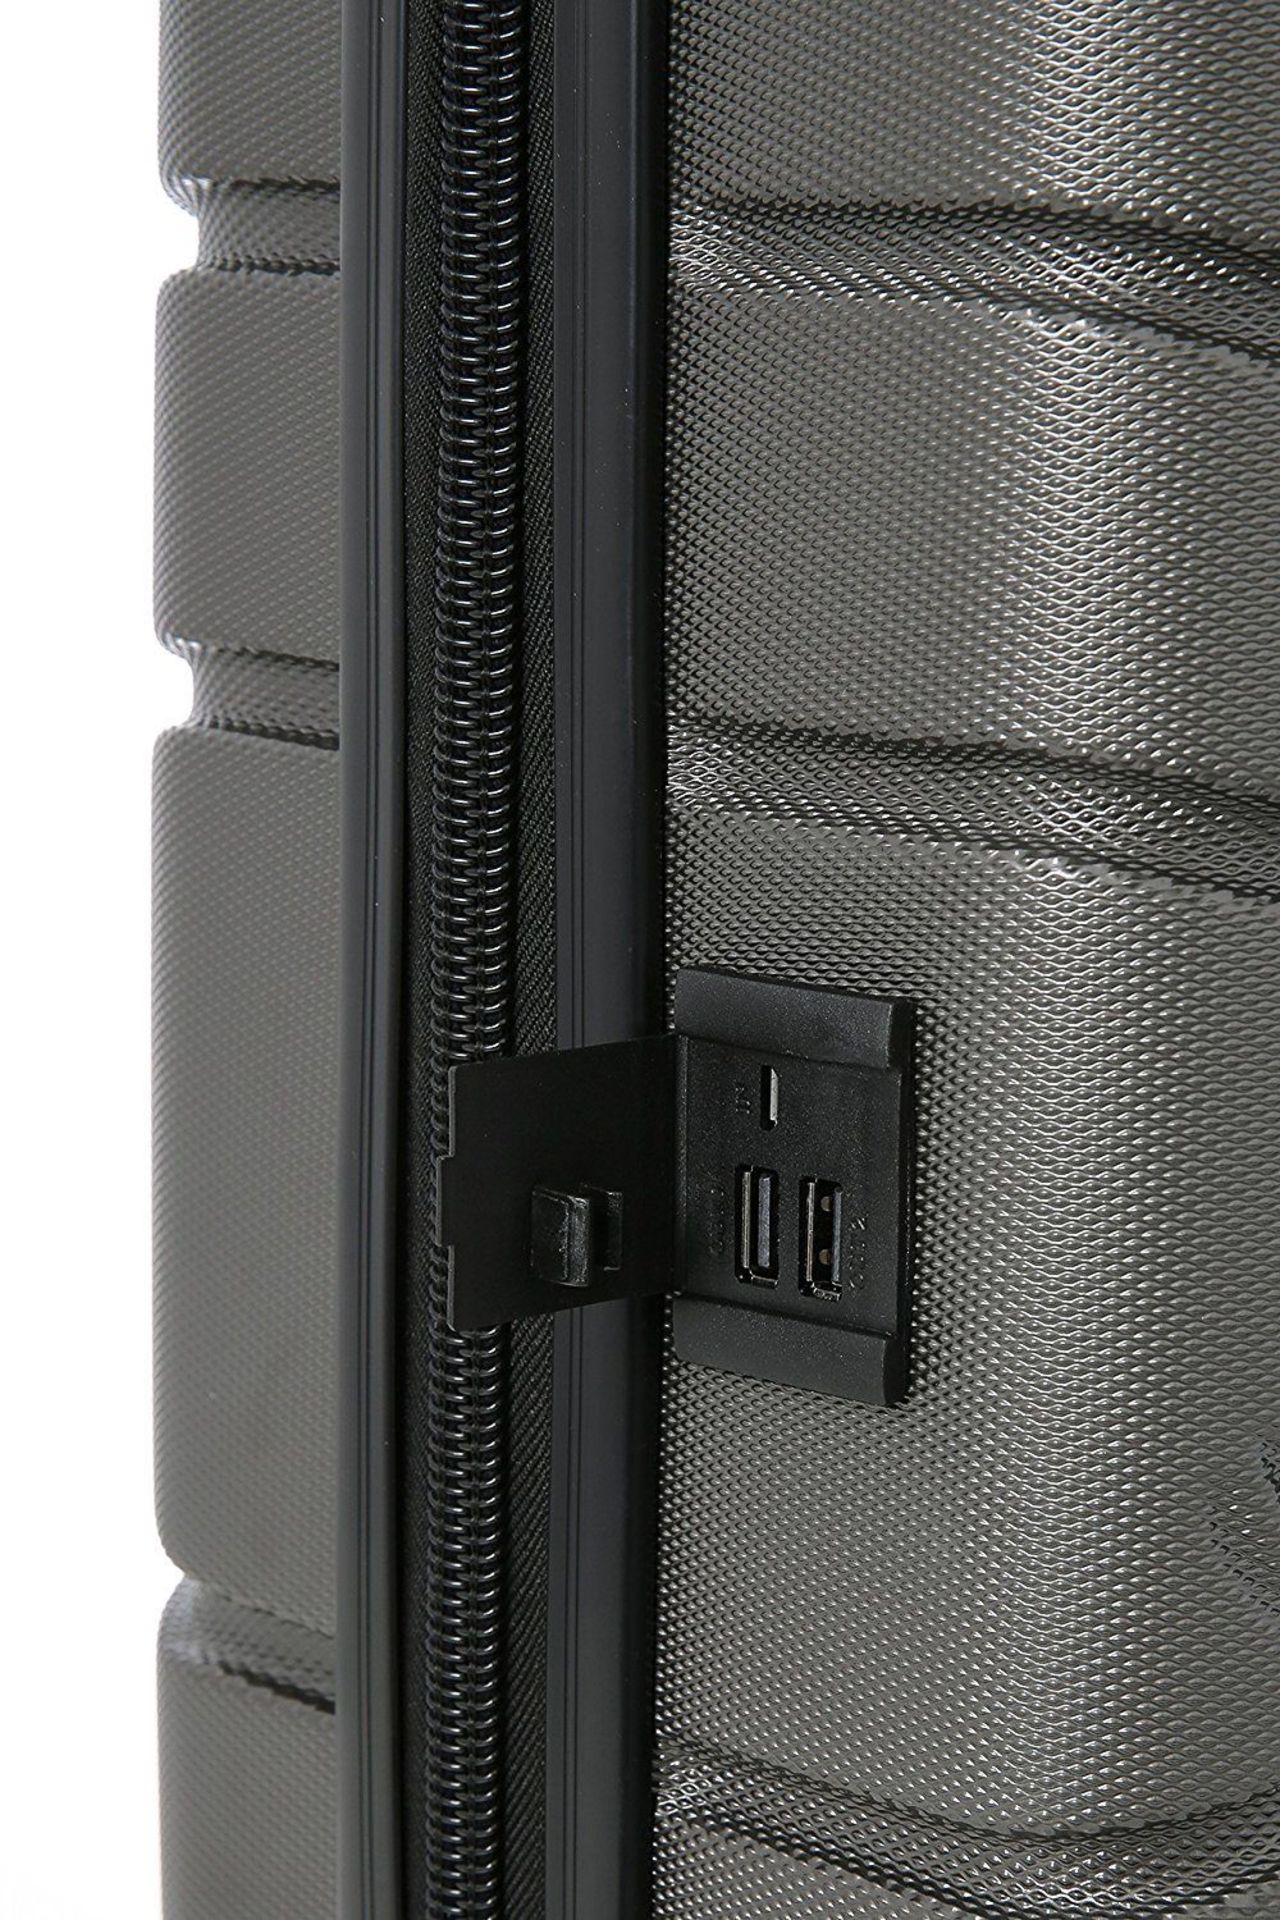 V Brand New Smart 21 Inch Suitcase/Cabin Case With Charging Facilities - Ebay Price £49.99 - 33L - Image 5 of 5